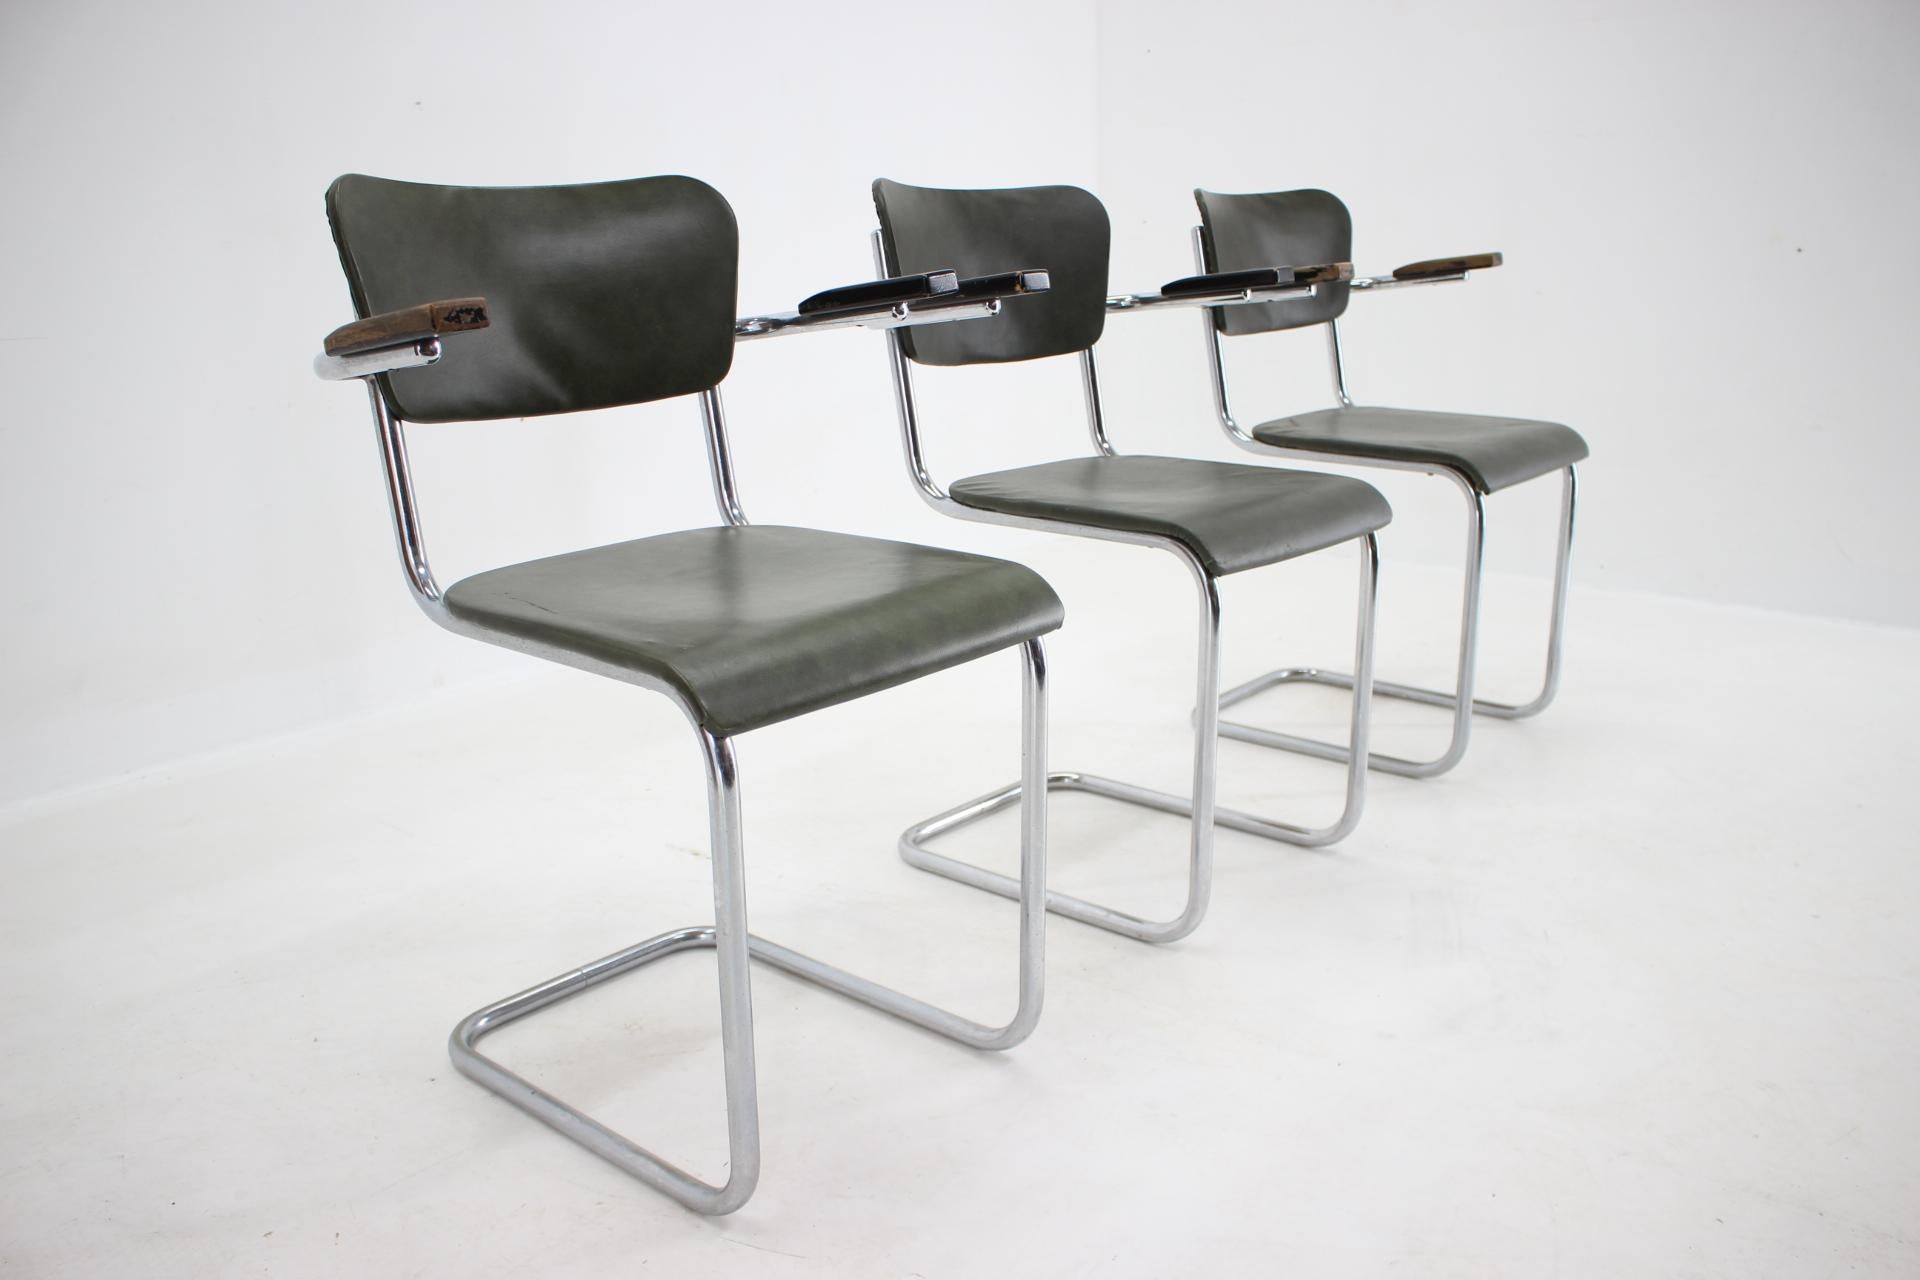 German Set of Three Bauhaus Chrome Dining Chairs by Mauser, 1940s For Sale